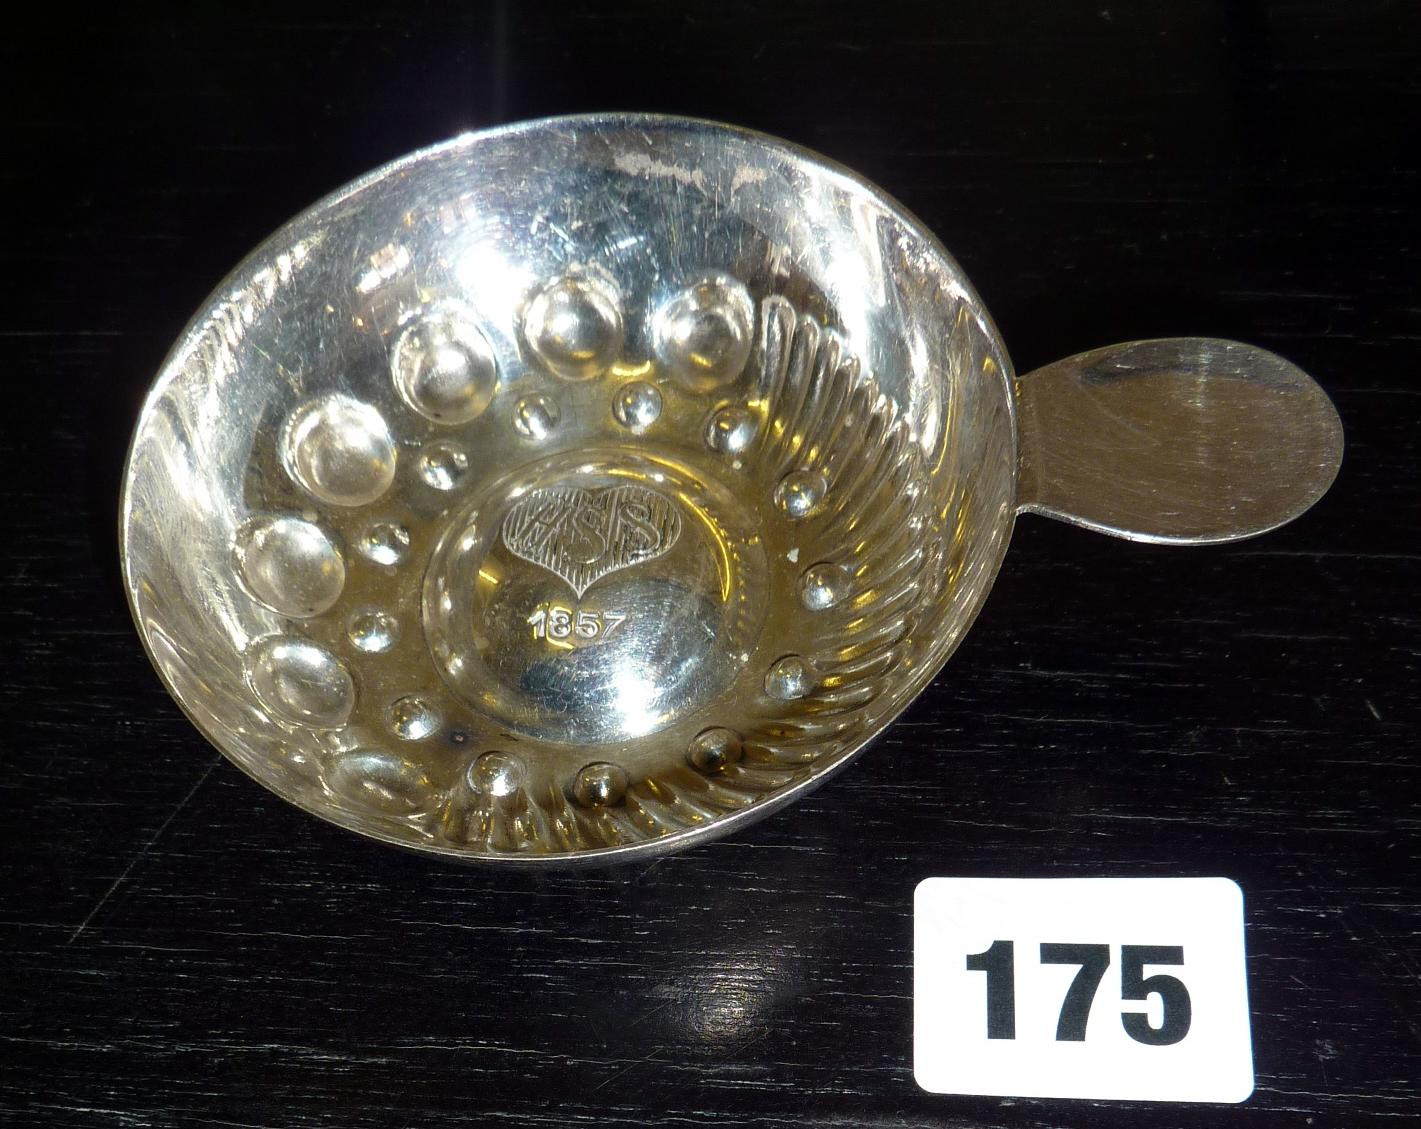 Continental silver tastevin dated 1857